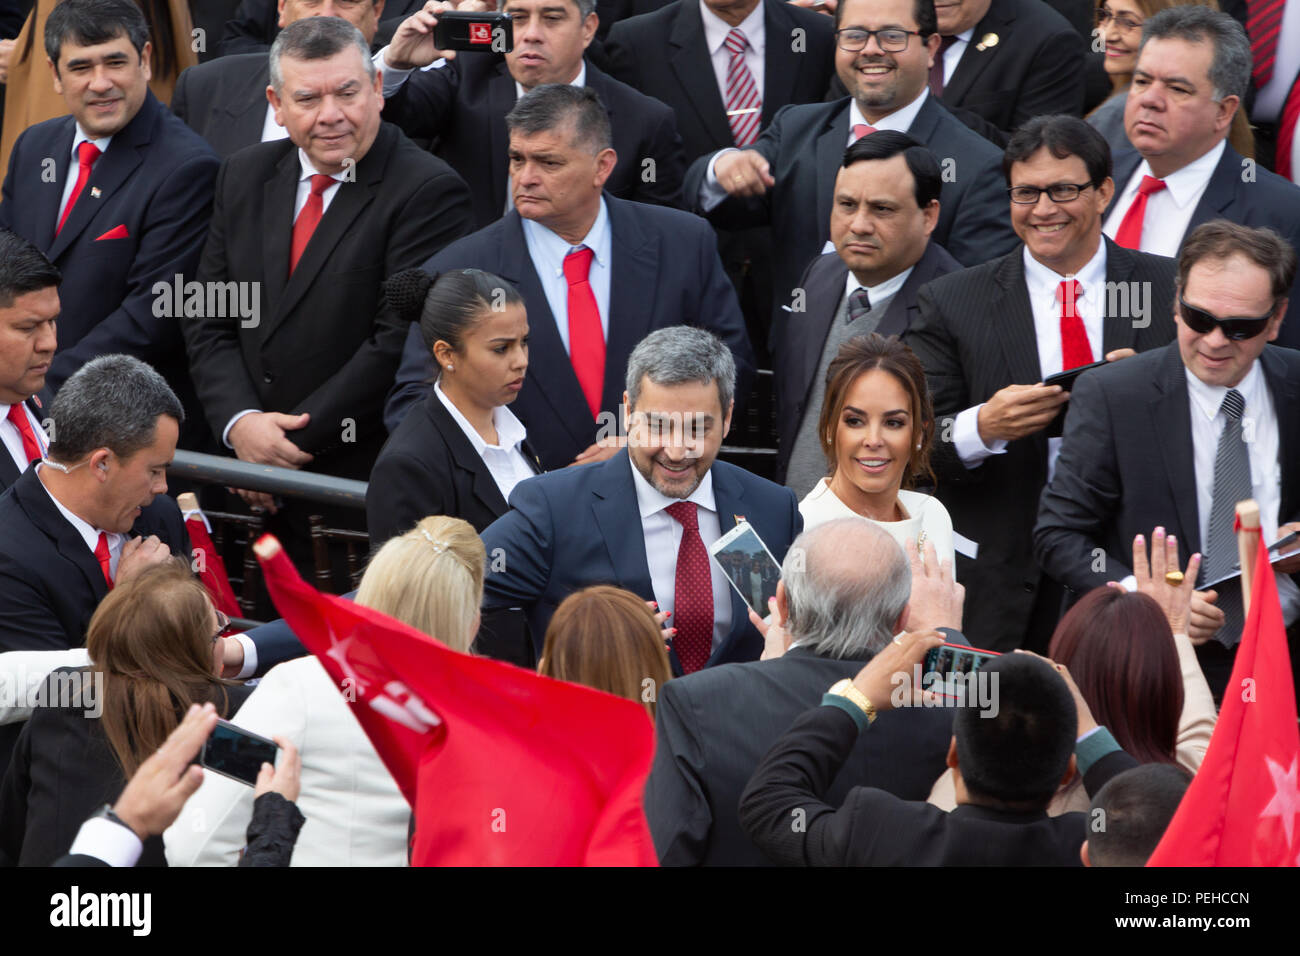 Asuncion, Paraguay. 15th Aug, 2018. Paraguay's president-elect Mario Abdo Benitez and his wife Silvana Lopez Moreira arrive for his swearing-in ceremony at the esplanade of the bay of the Palace of Lopez in Asuncion, Paraguay. Credit: Andre M. Chang/ARDUOPRESS/Alamy Live News Stock Photo